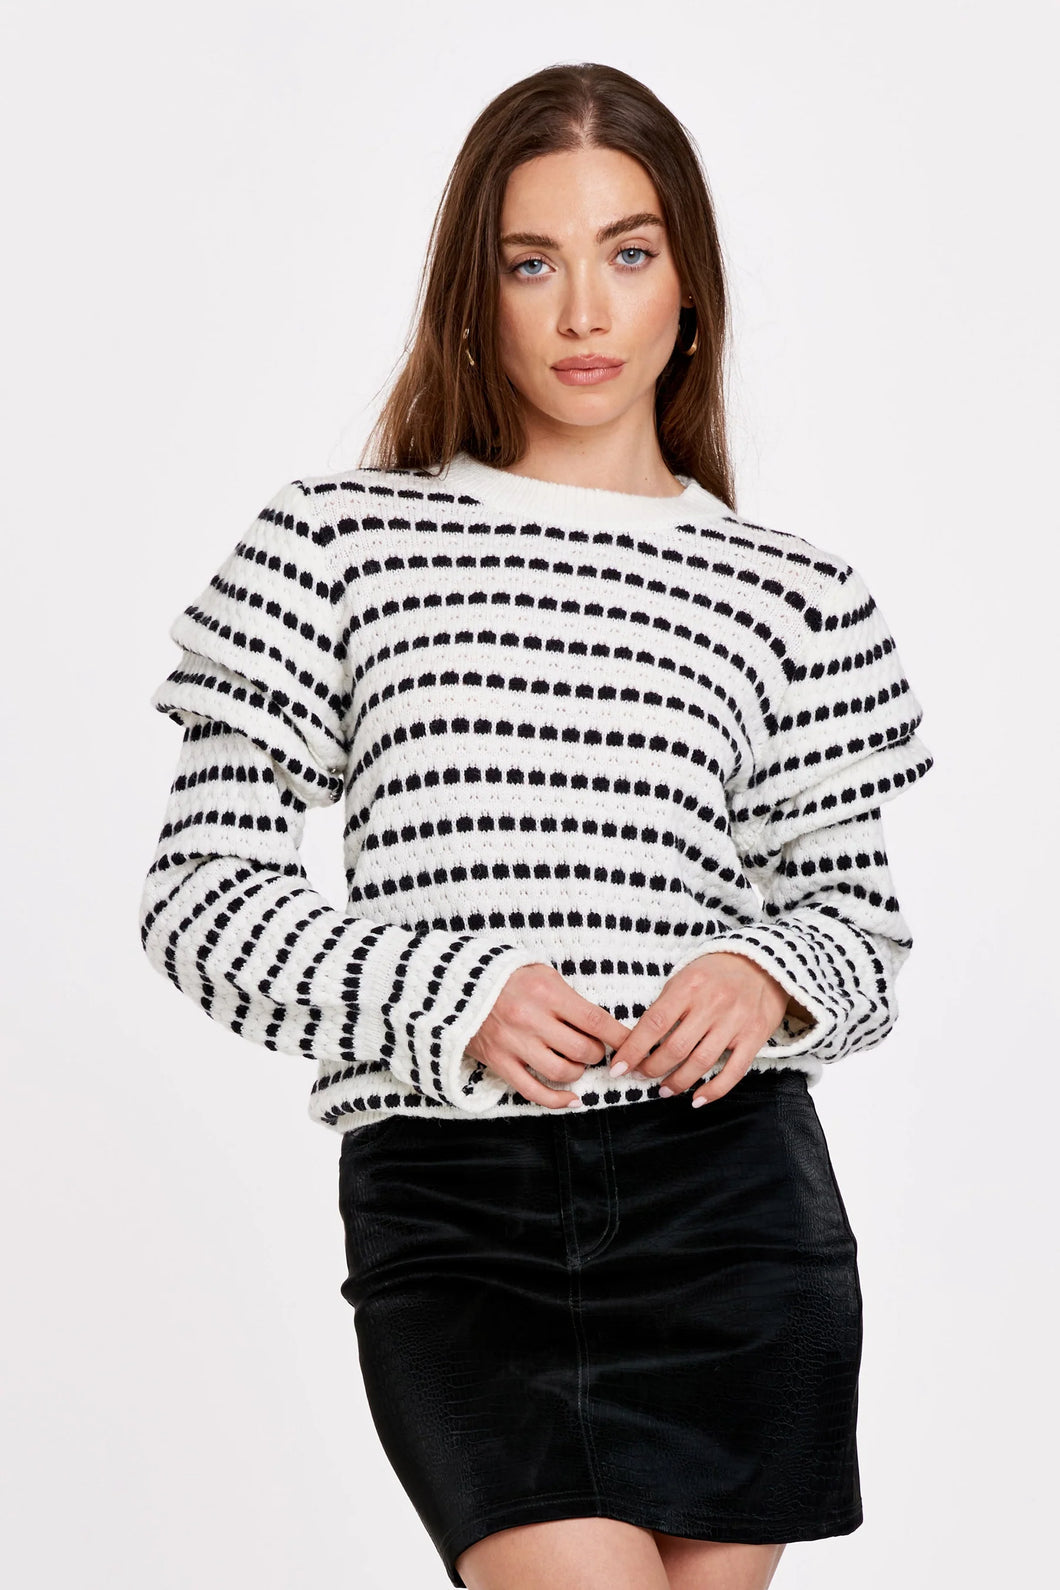 haisley double petal sweater in black and white combo